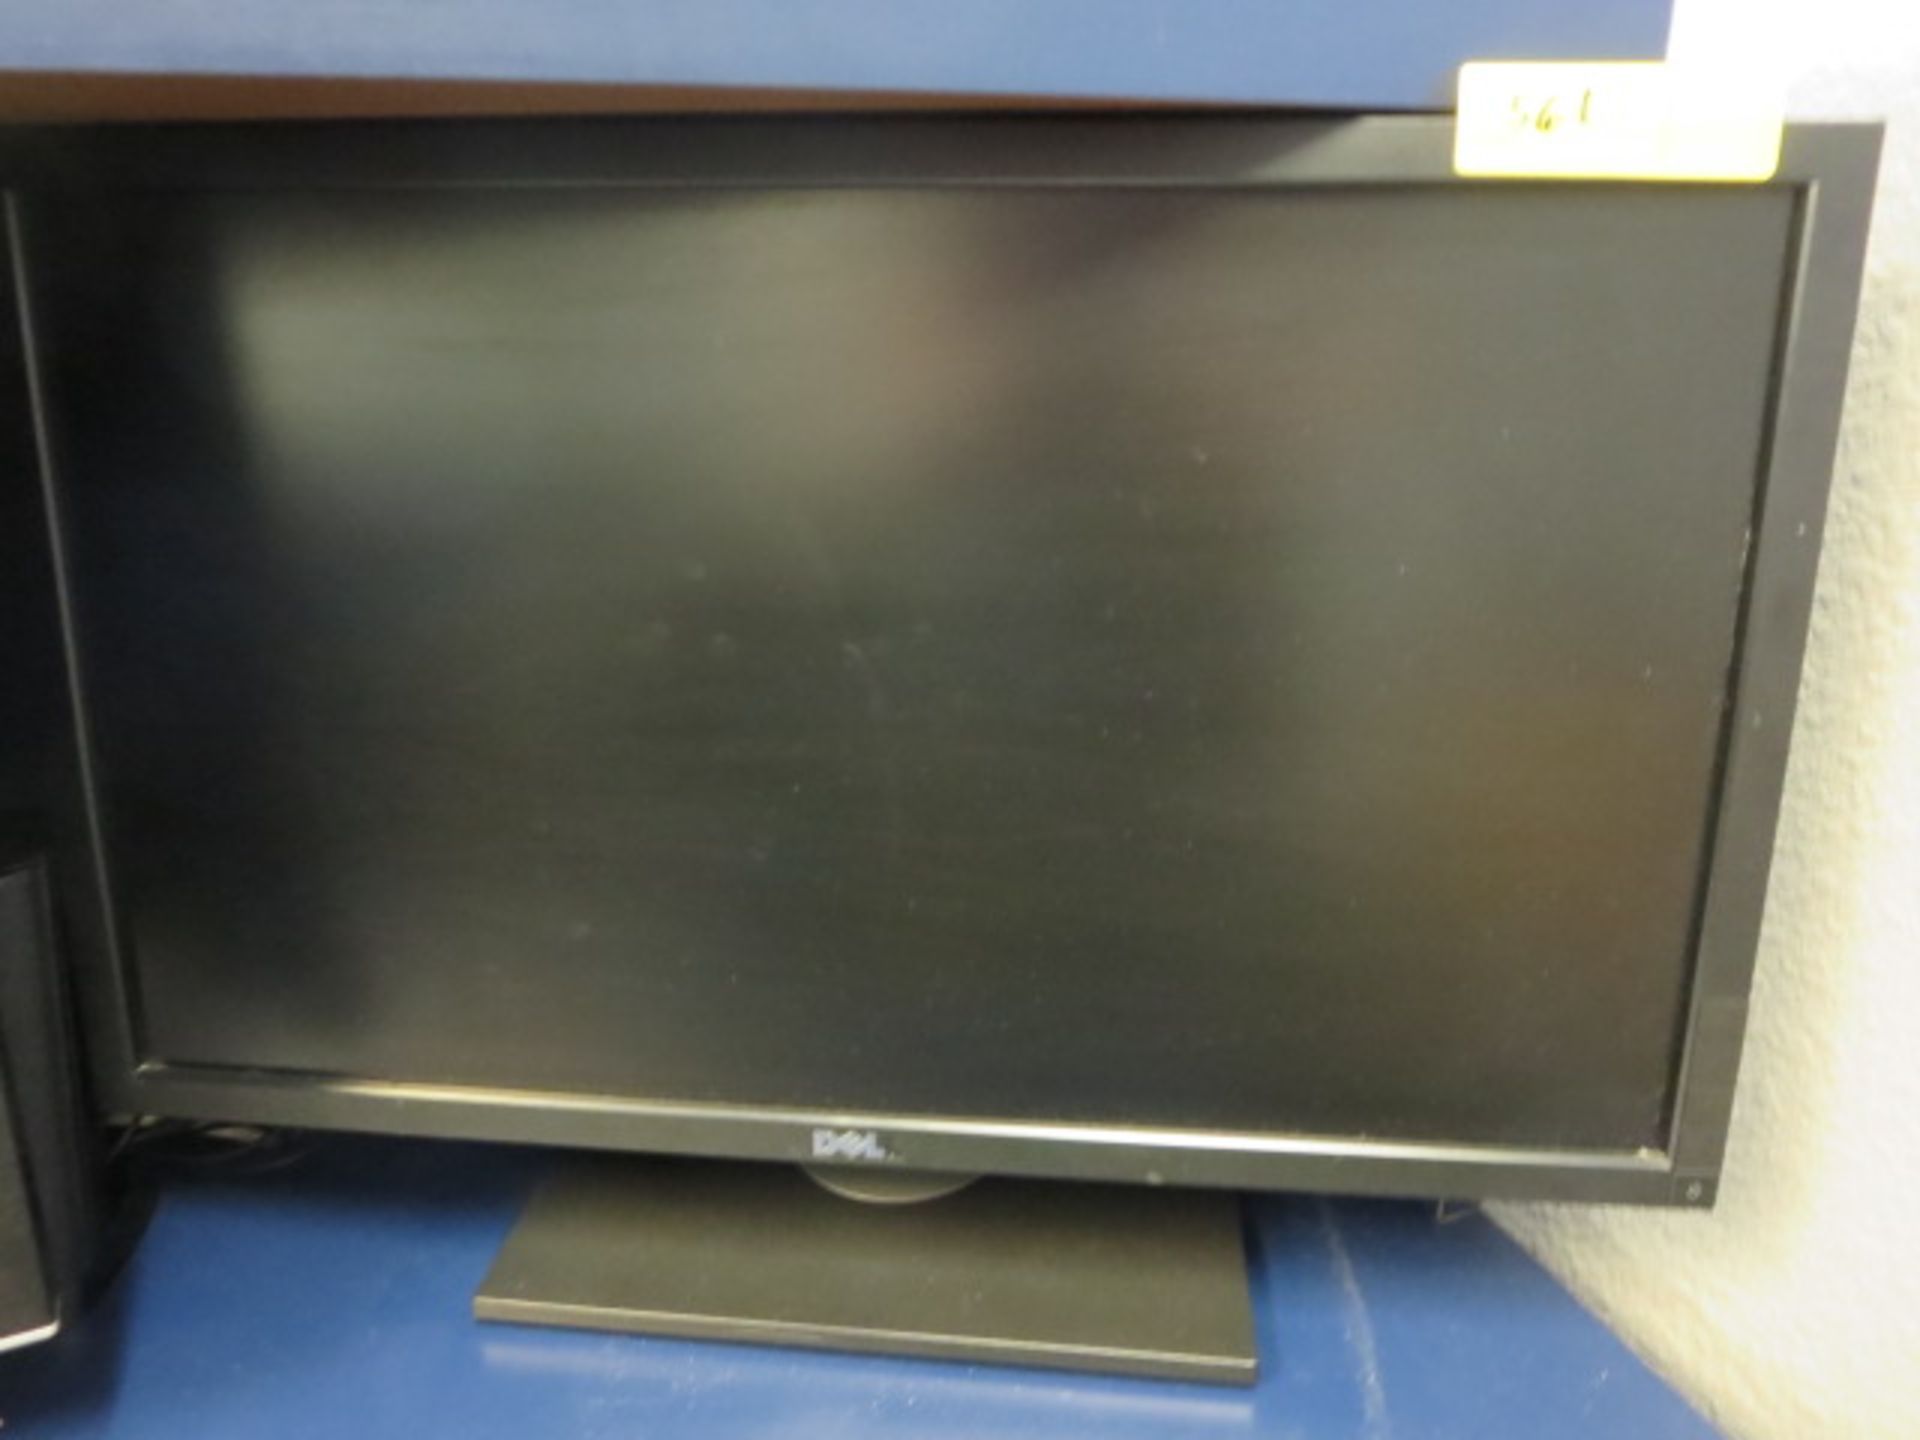 Dell 24” LCD Monitor, model P2411Hb, Includes Keyboard